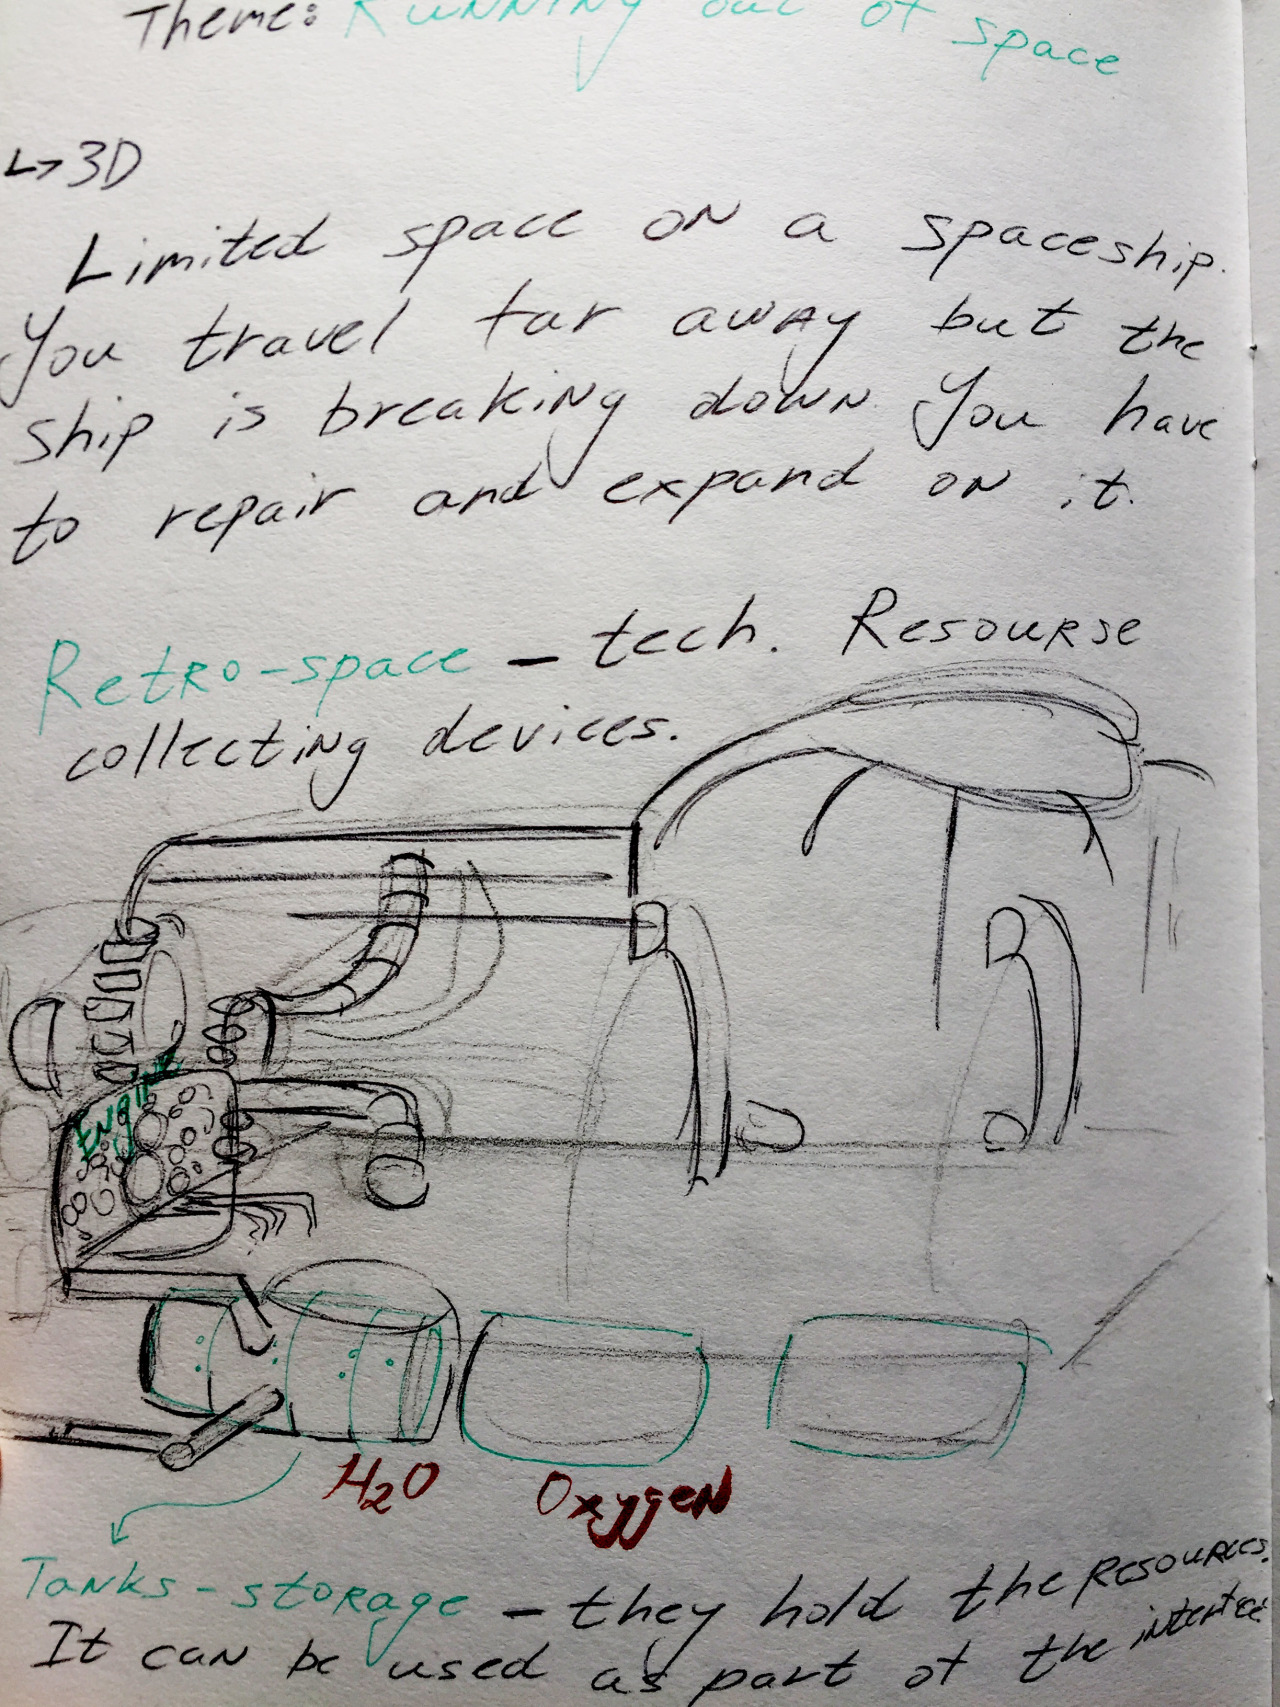 Sketchbook photograph reading “3D - Limited space on a spaceship. You travel far away but the ship is breaking down. You have to repair and expand on it”. Under are a few more annotations and a sketch of a spaceship room.